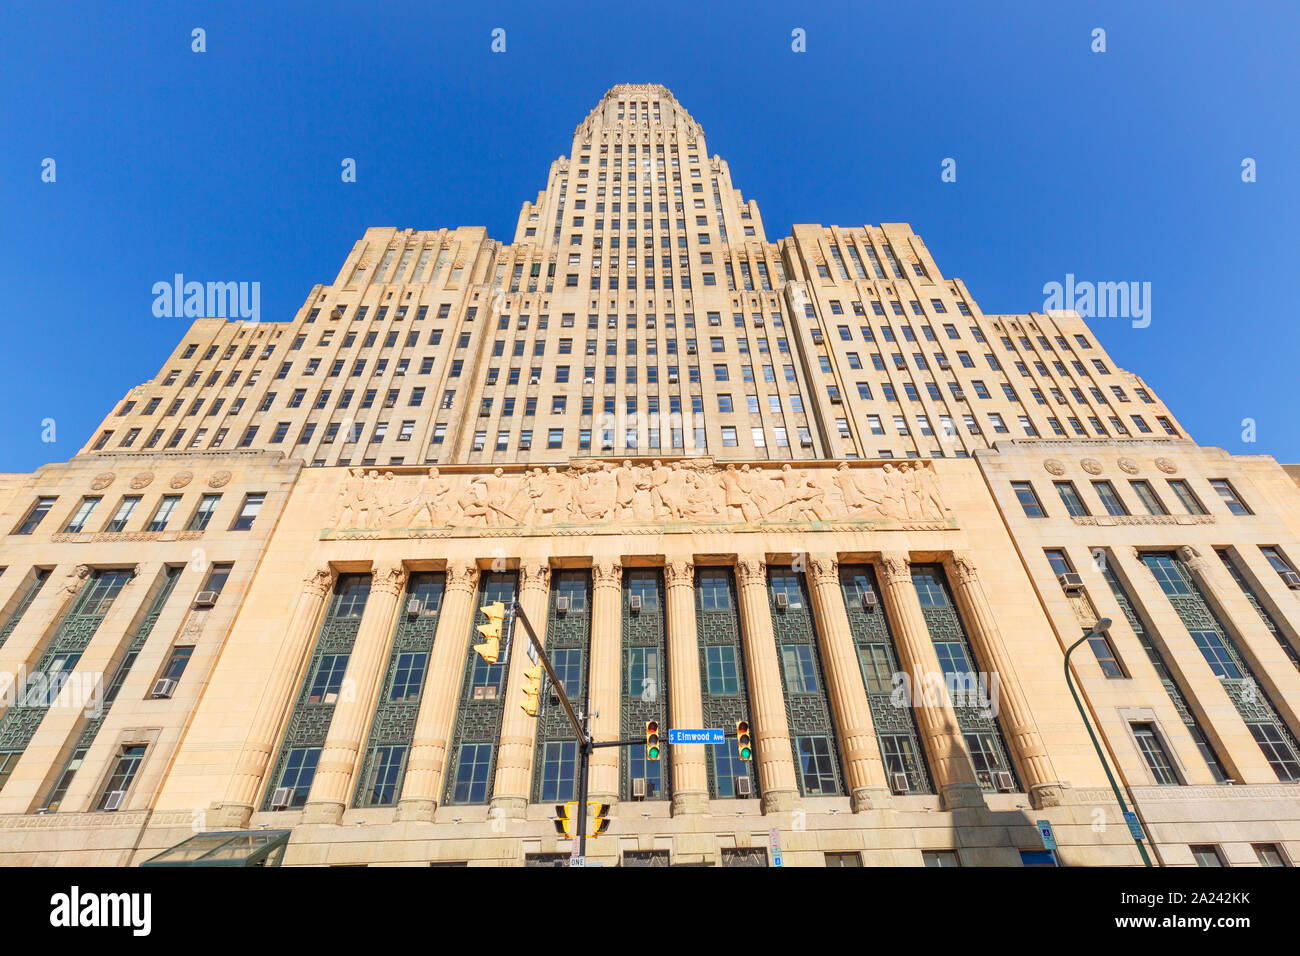 Buffalo City Hall, The 378-foot-tall building is the seat for municipal government, one of the largest and tallest municipal buildings in the United S Stock Photo